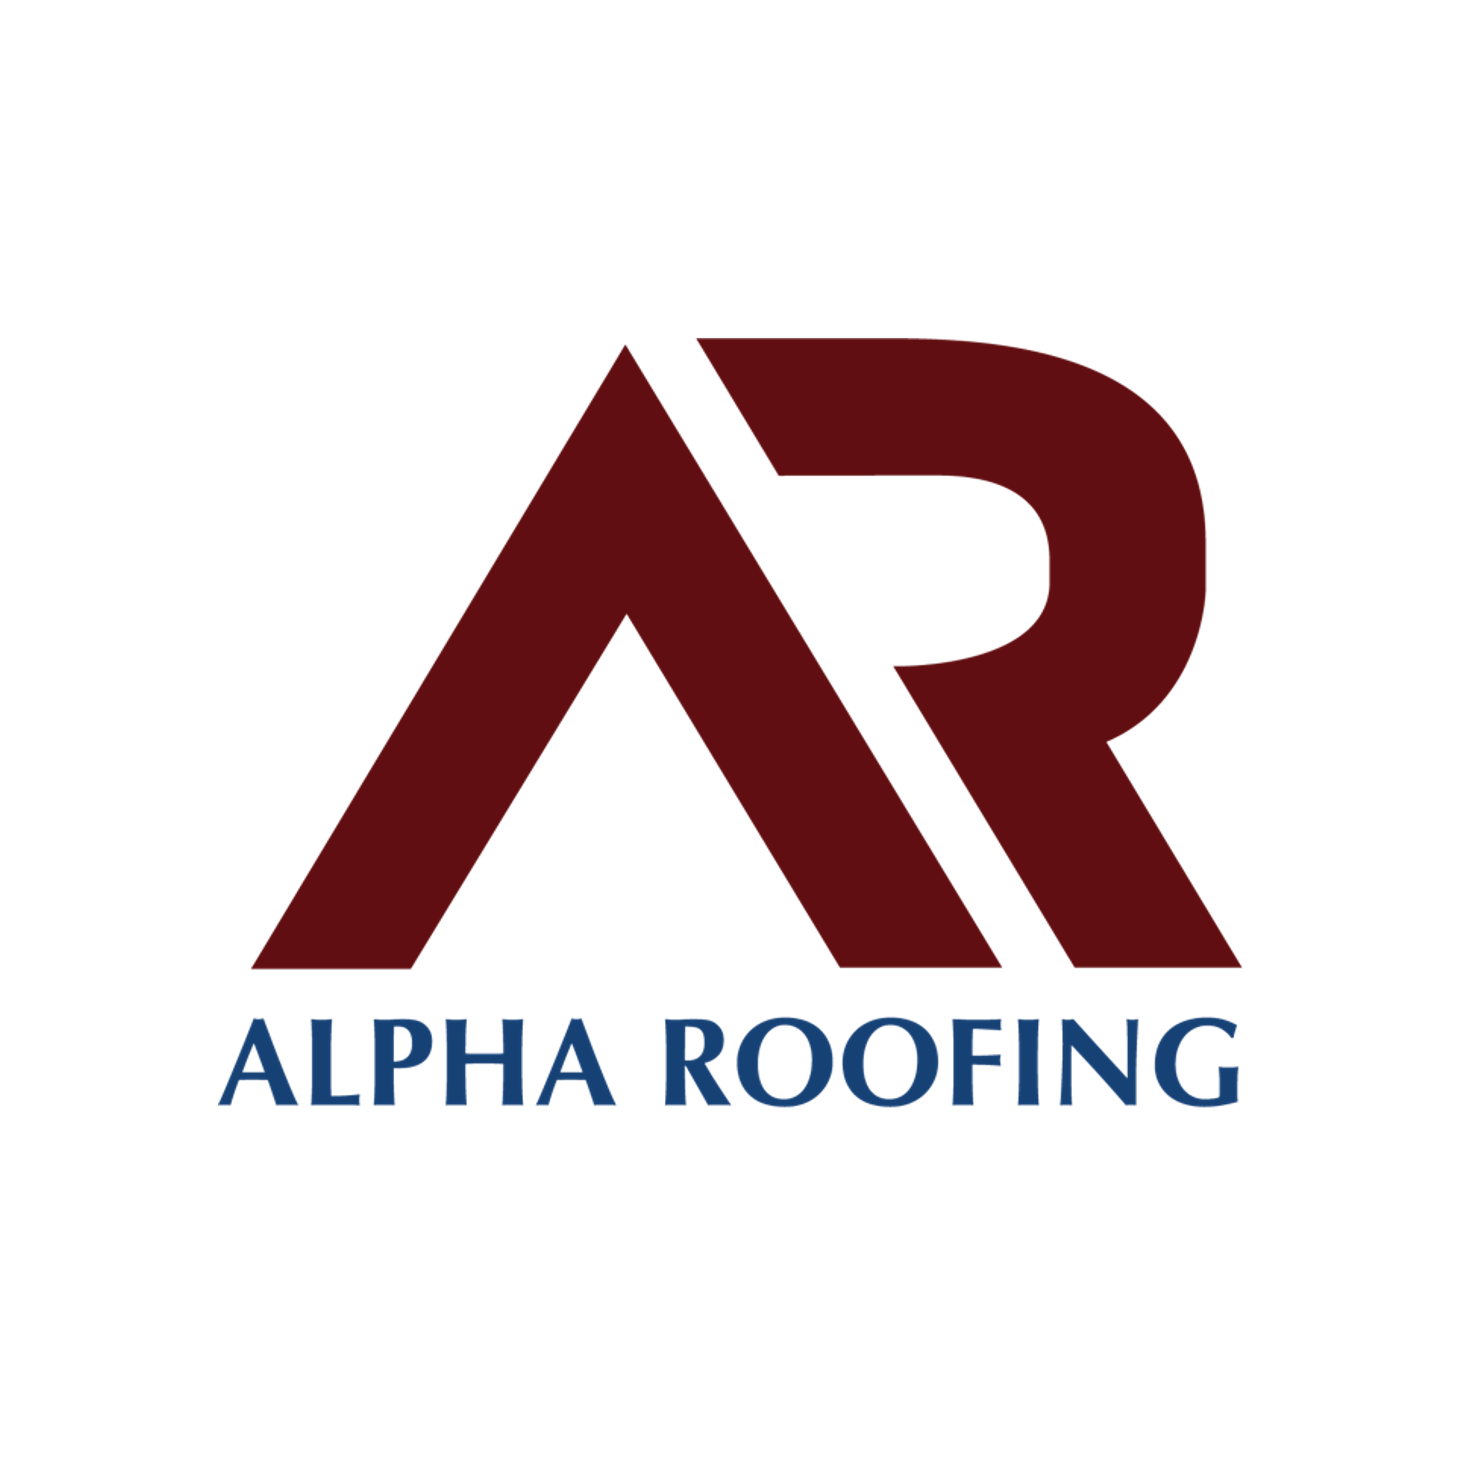 Alpha Roofing - Lawrence, KS 66044 - (785)841-7663 | ShowMeLocal.com